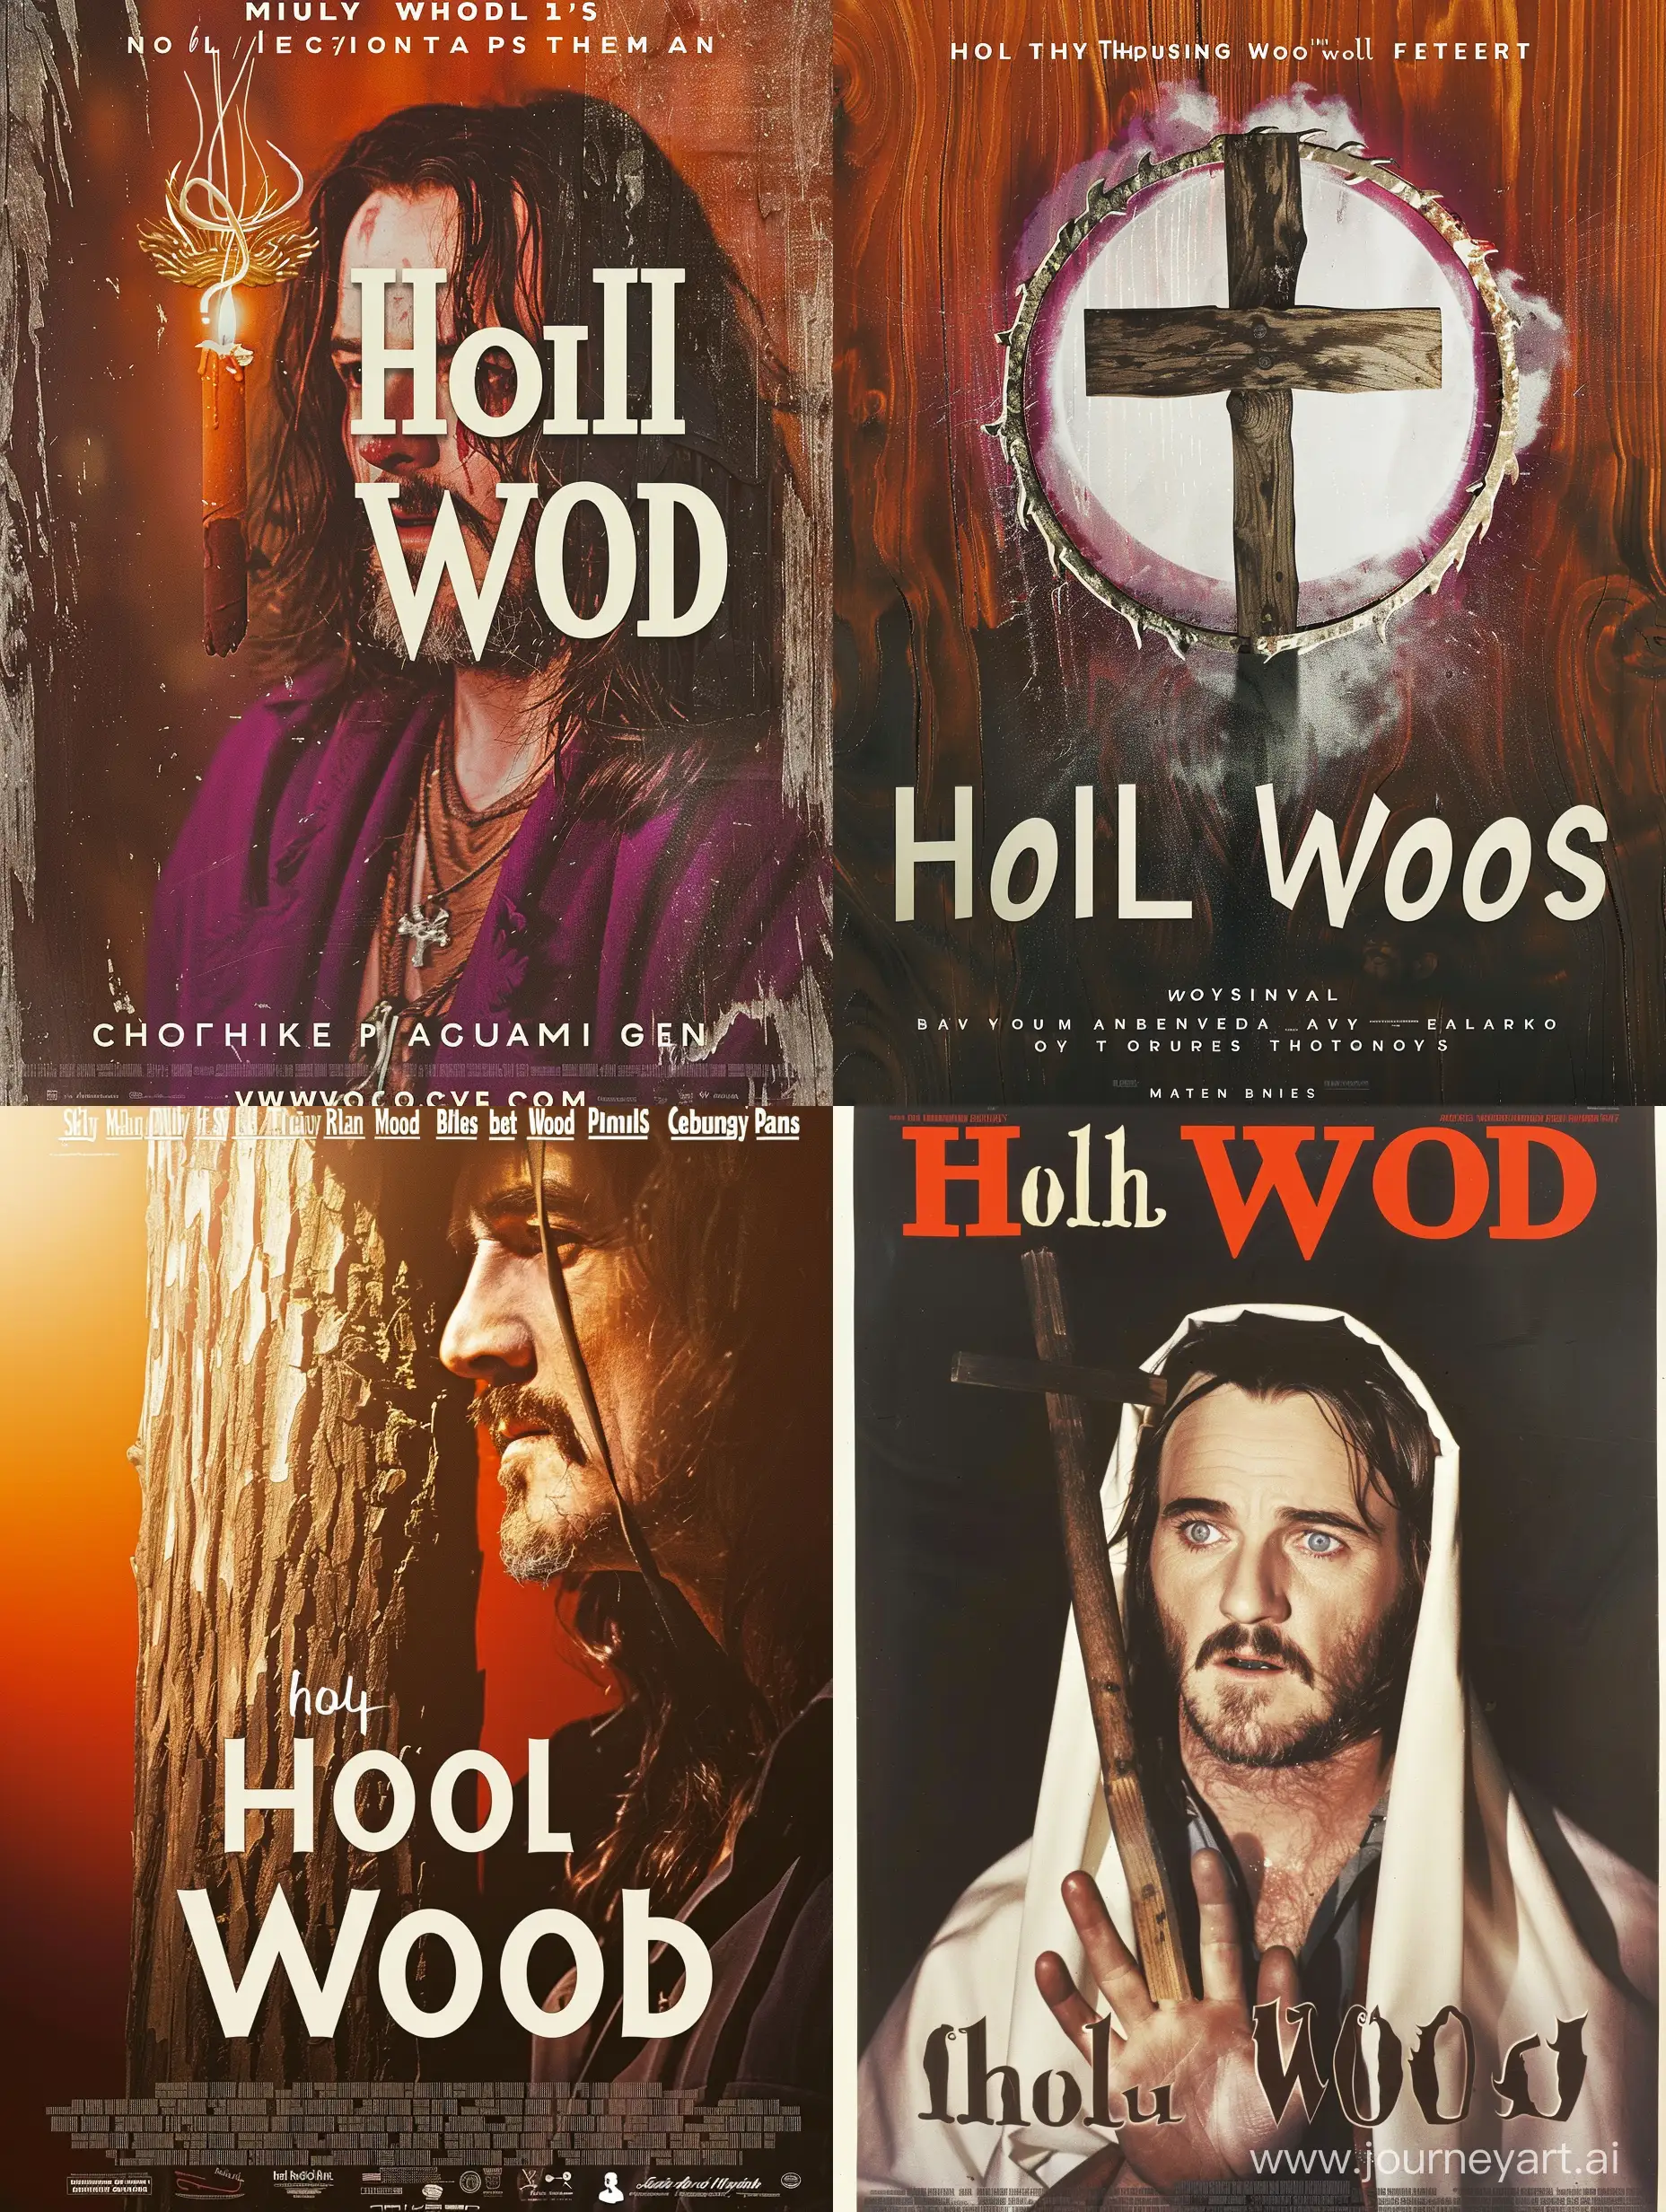 Movie poster for the Marilyn Manson film Holy Wood